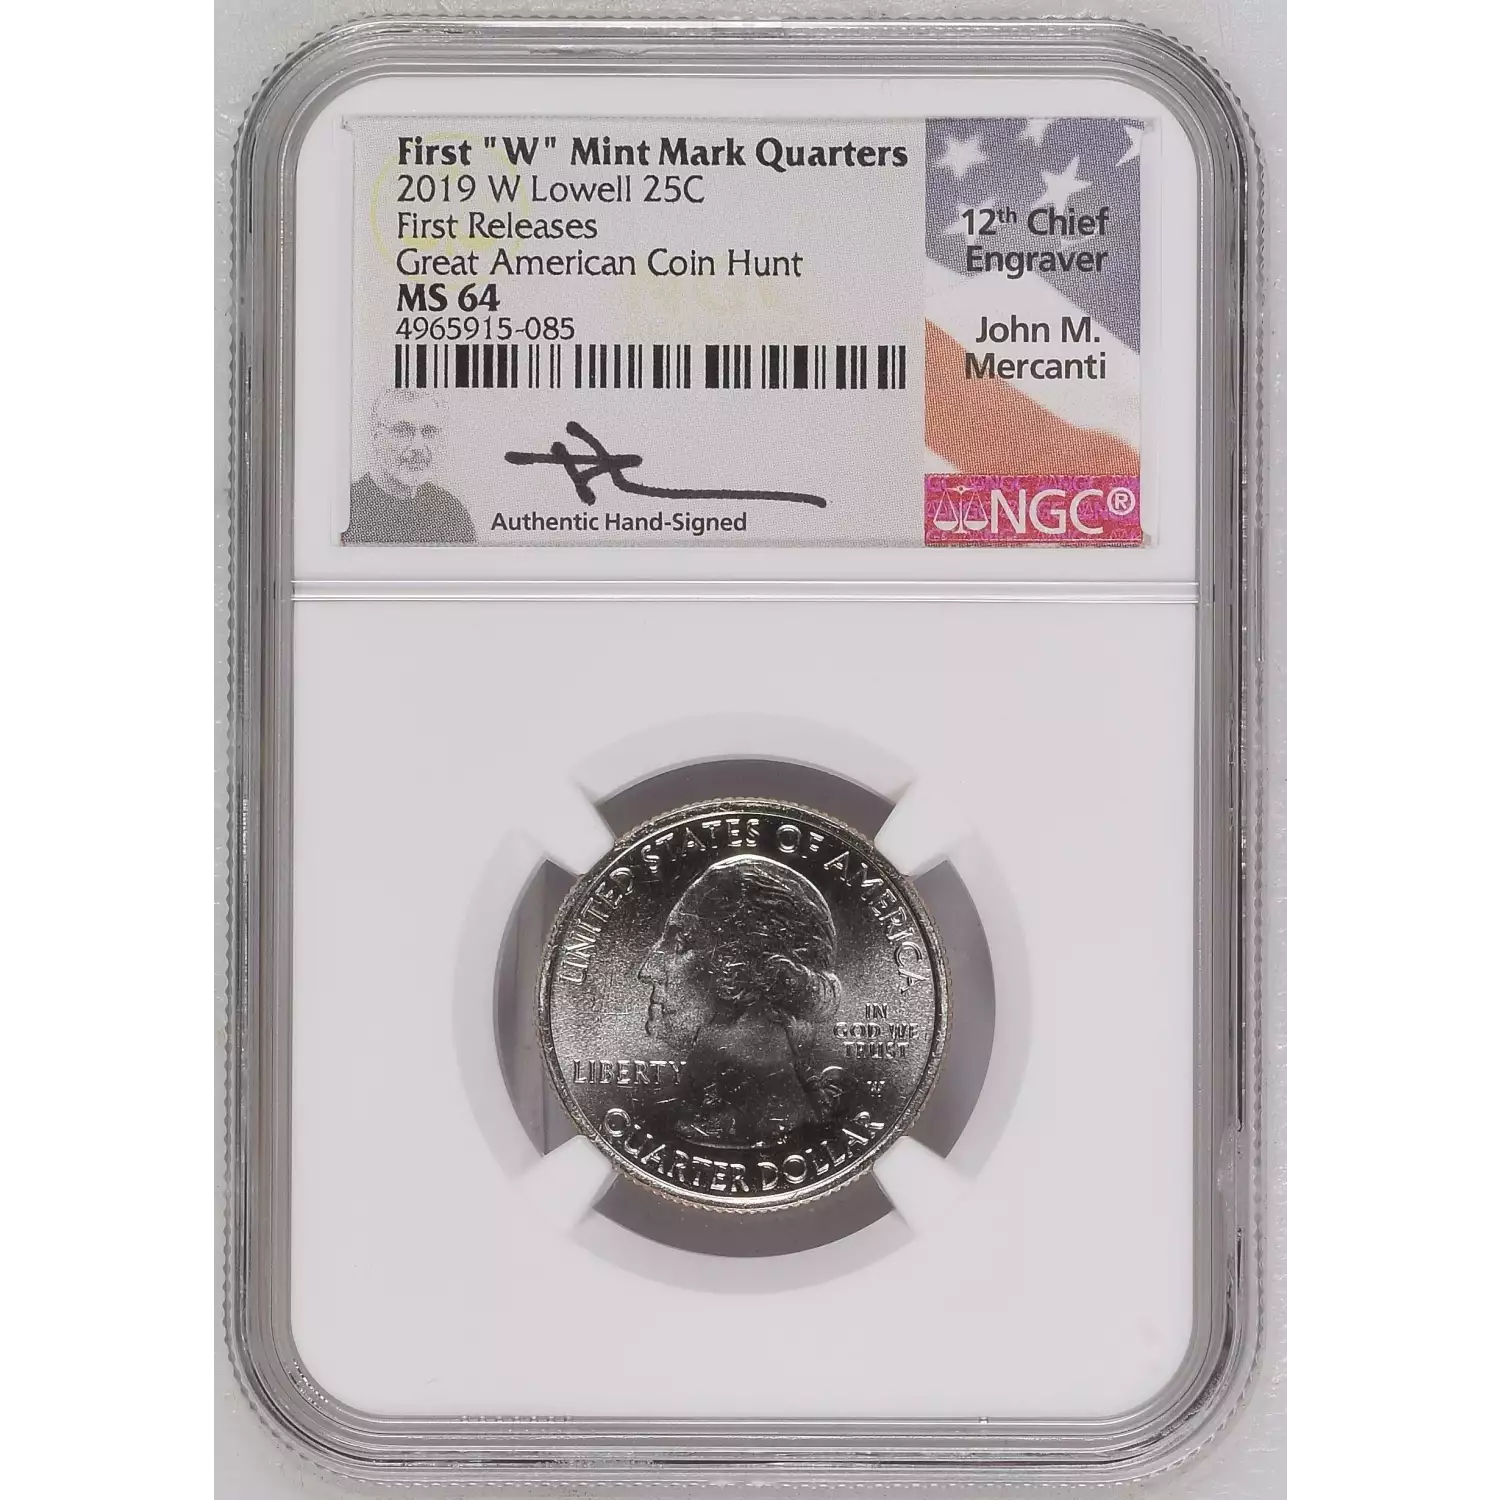 2019 W First Releases Great American Coin Hunt First 